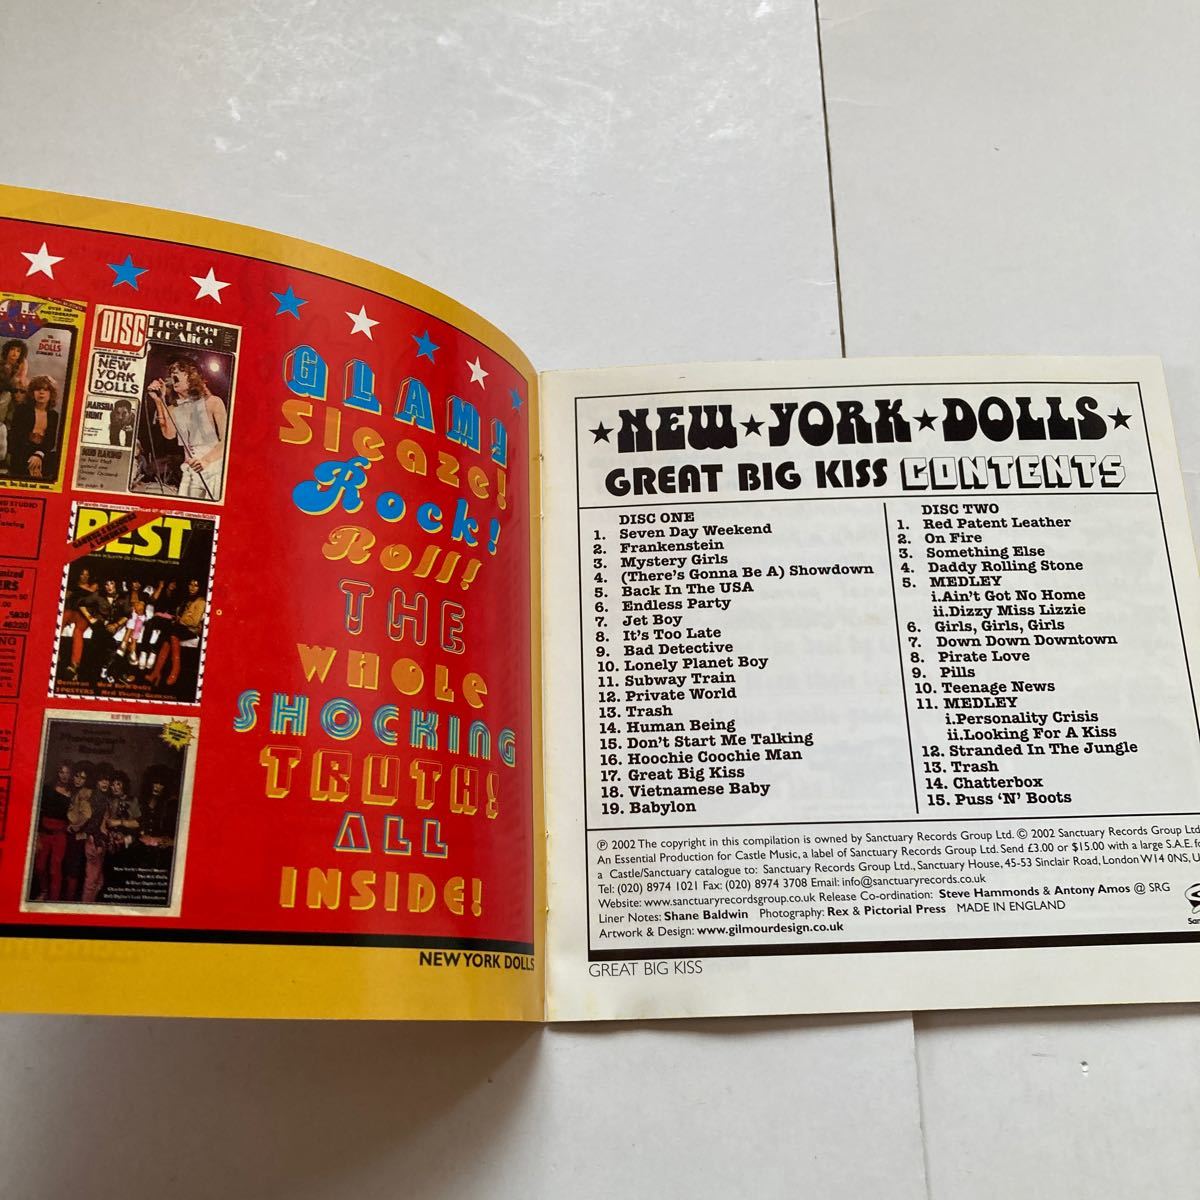 NEW YORK DOLLS ニューヨーク・ドールズ GREAT BIG KISS Seven Days Weekend Jet Boy Human Being Personality Crisis Looking For A Kiss_画像6